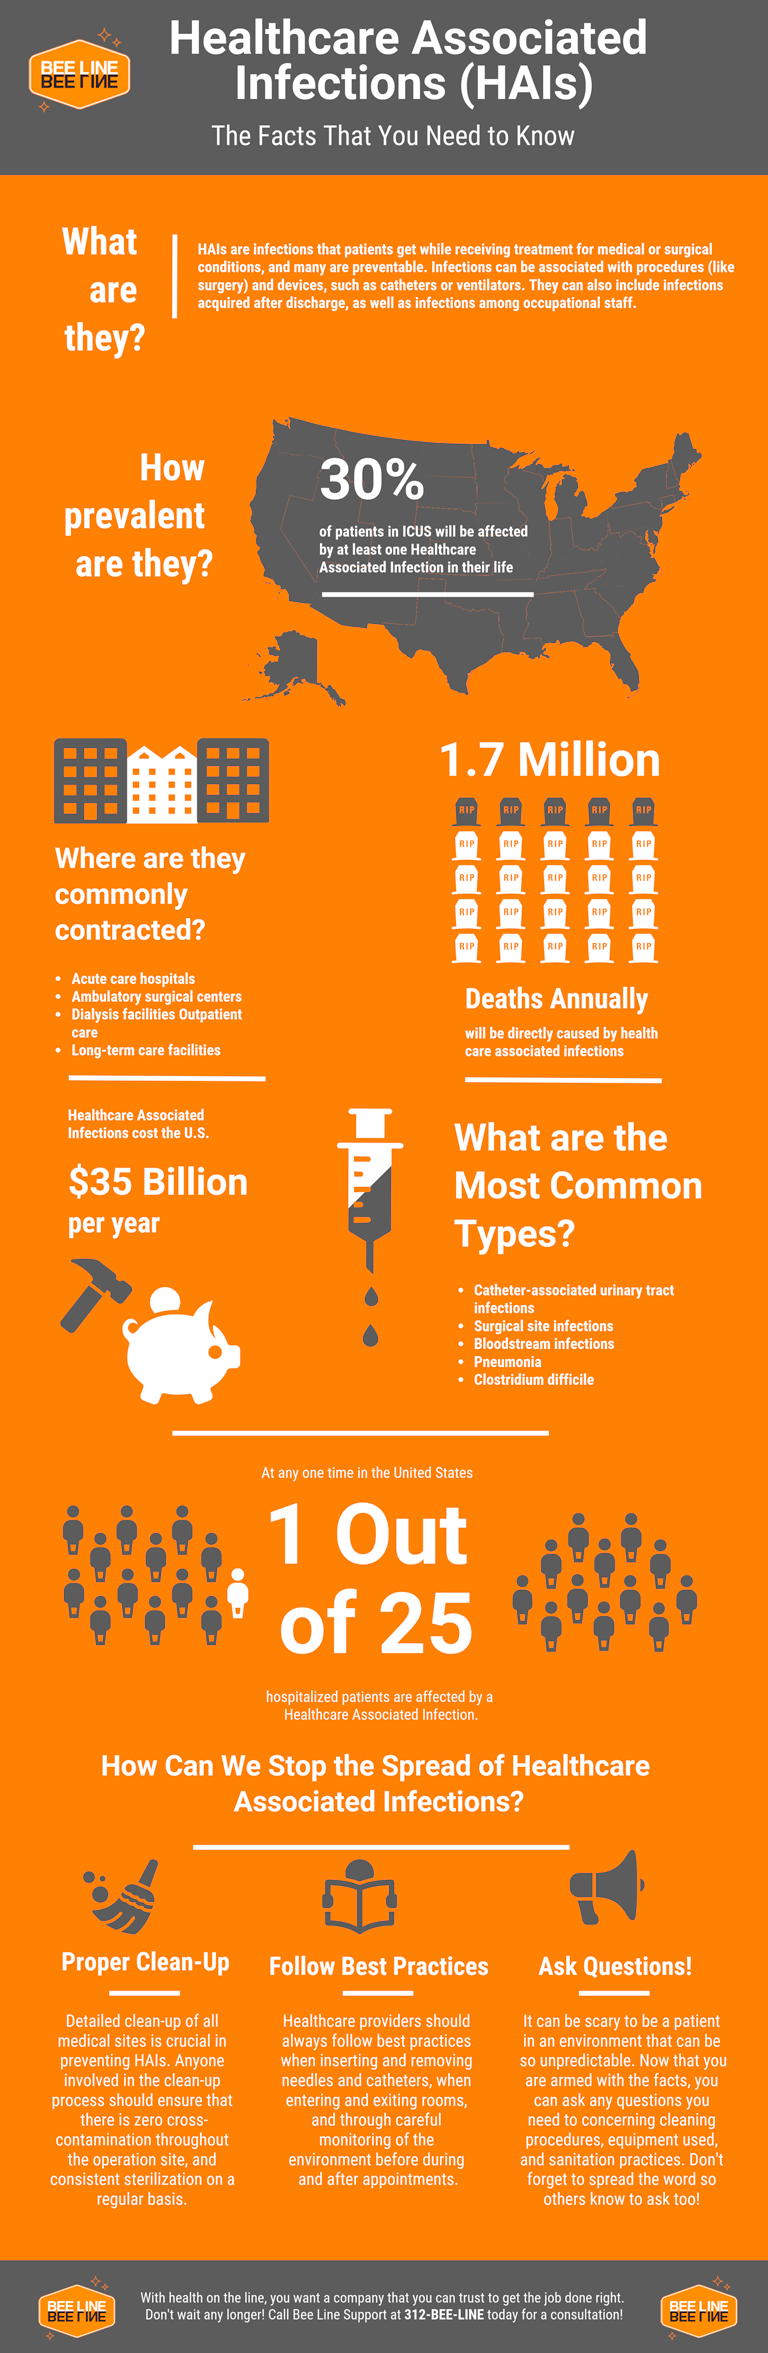 Healthcare Associated Infections Facts (HAIs) infographic